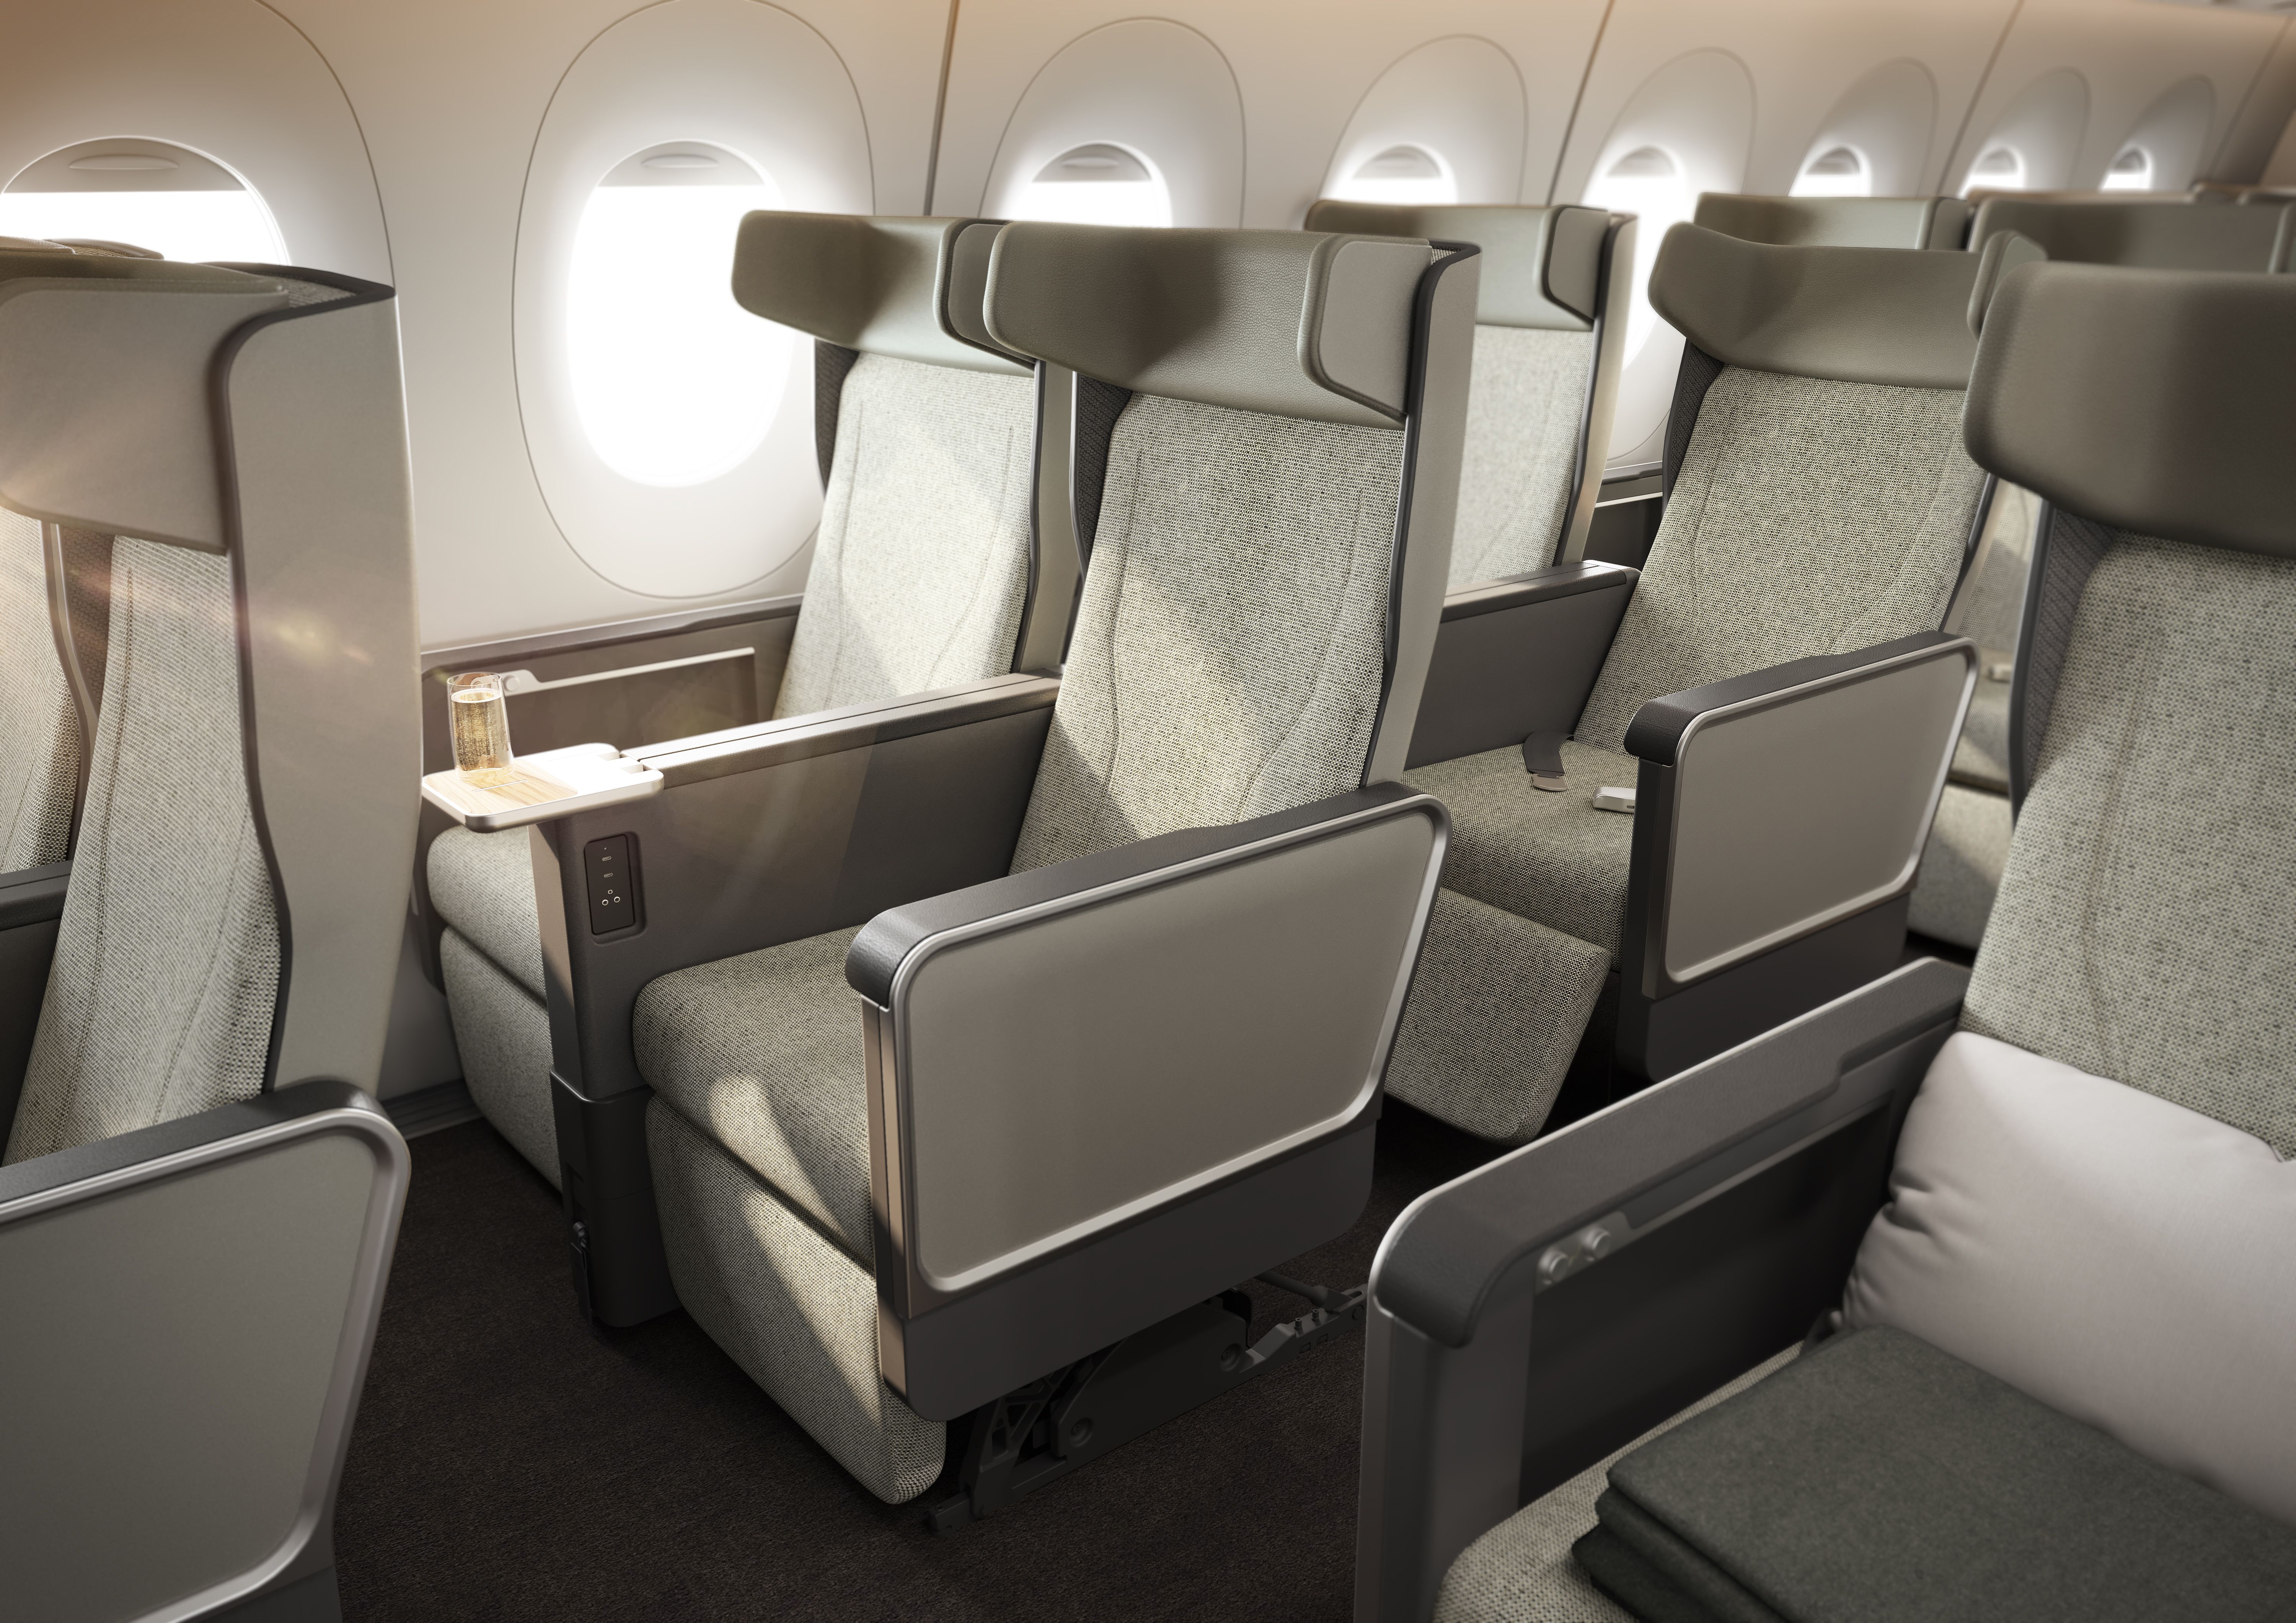 Each seat will also have Bluetooth connectivity and free Wi-Fi, Qantas says.